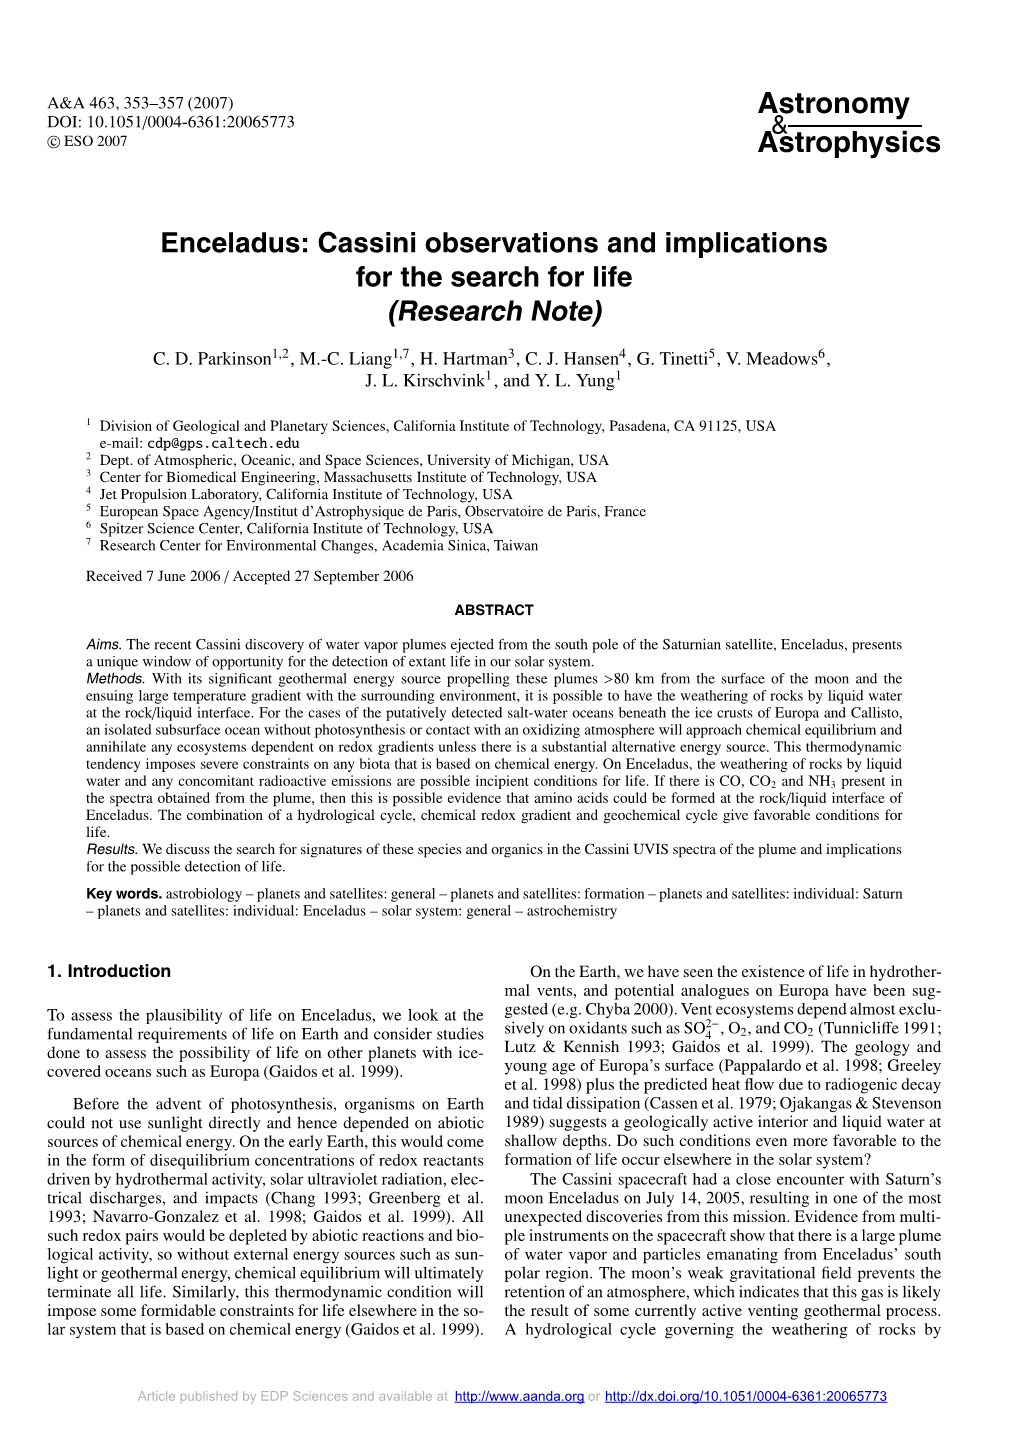 Enceladus: Cassini Observations and Implications for the Search for Life (Research Note)